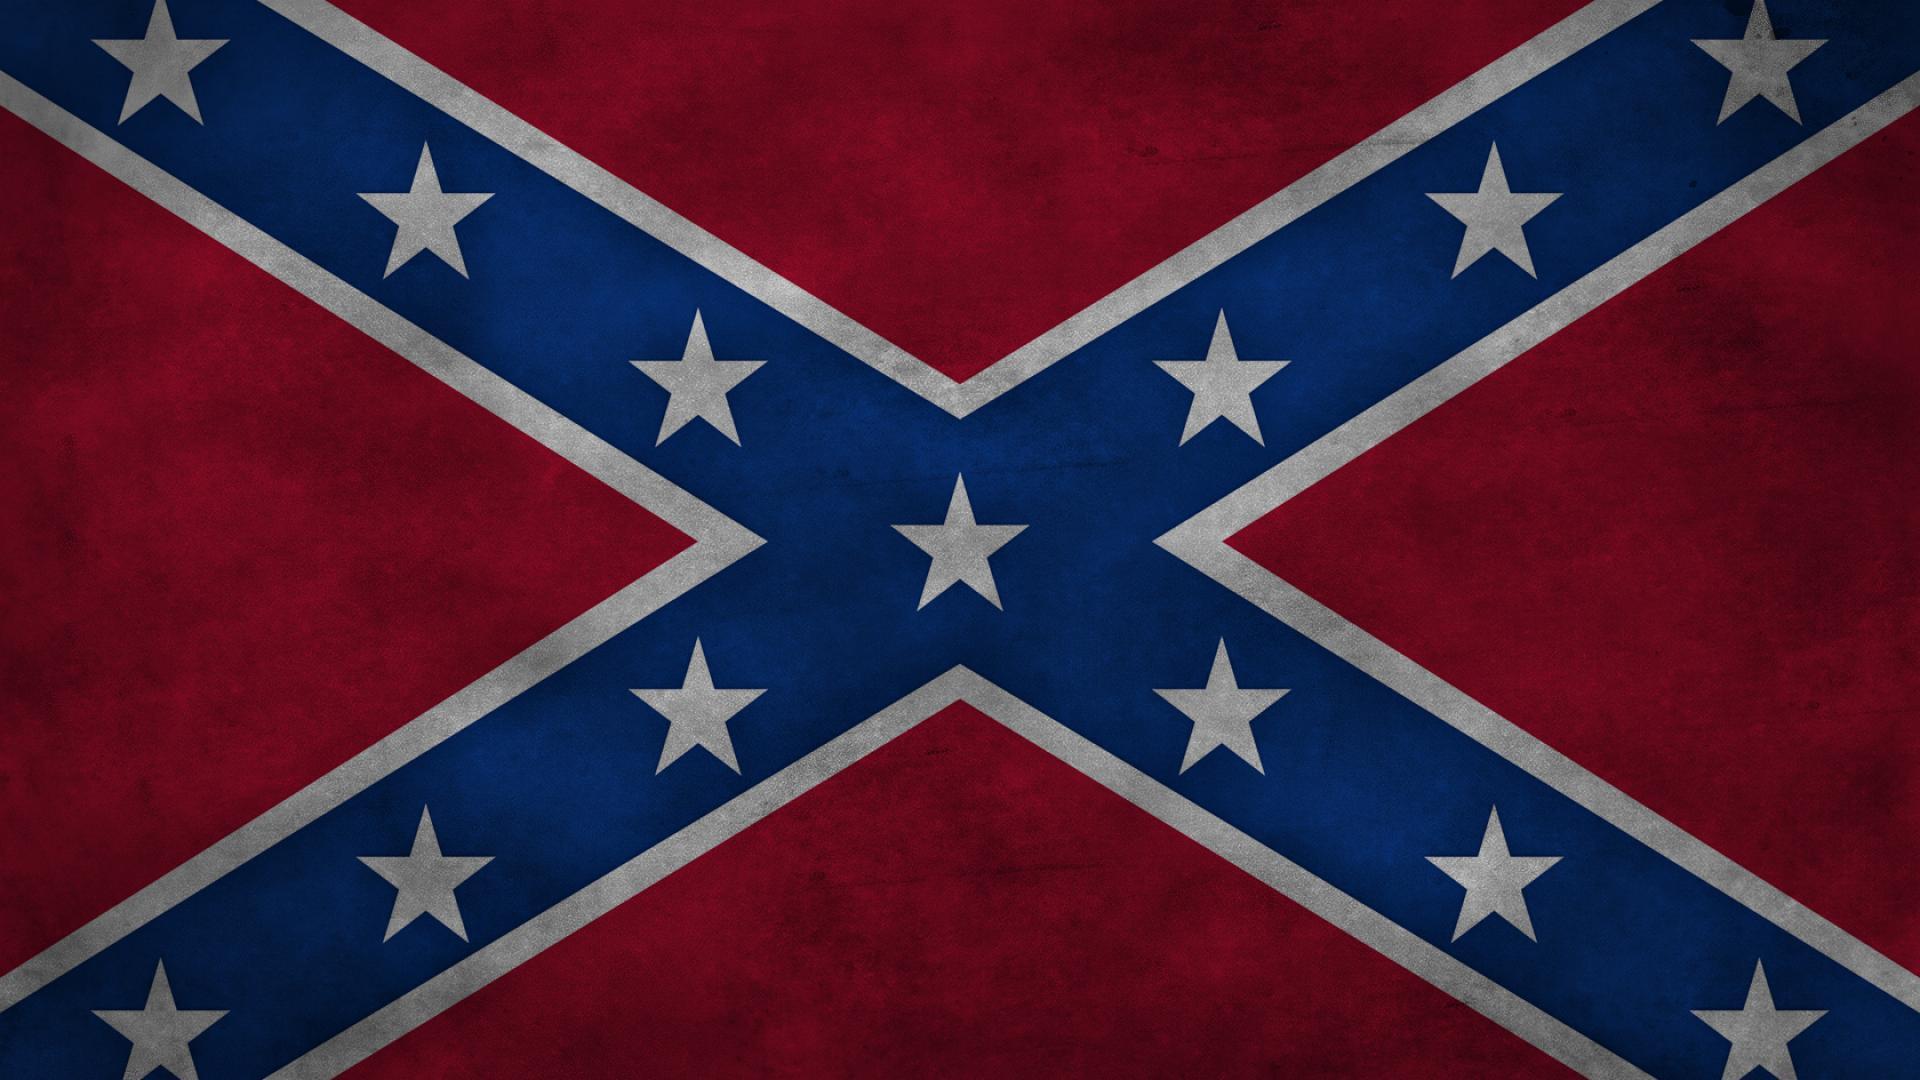 HD wallpaper, Battle Flag Of Tennessee, Rebellion, Rebels, History, Flag, Jefferson Davis, Bars, American Flag, Confederate States Of America, Blue, White, Secession, War Of Northern Aggression, Confederate Flag, Red, Civil War, Stars